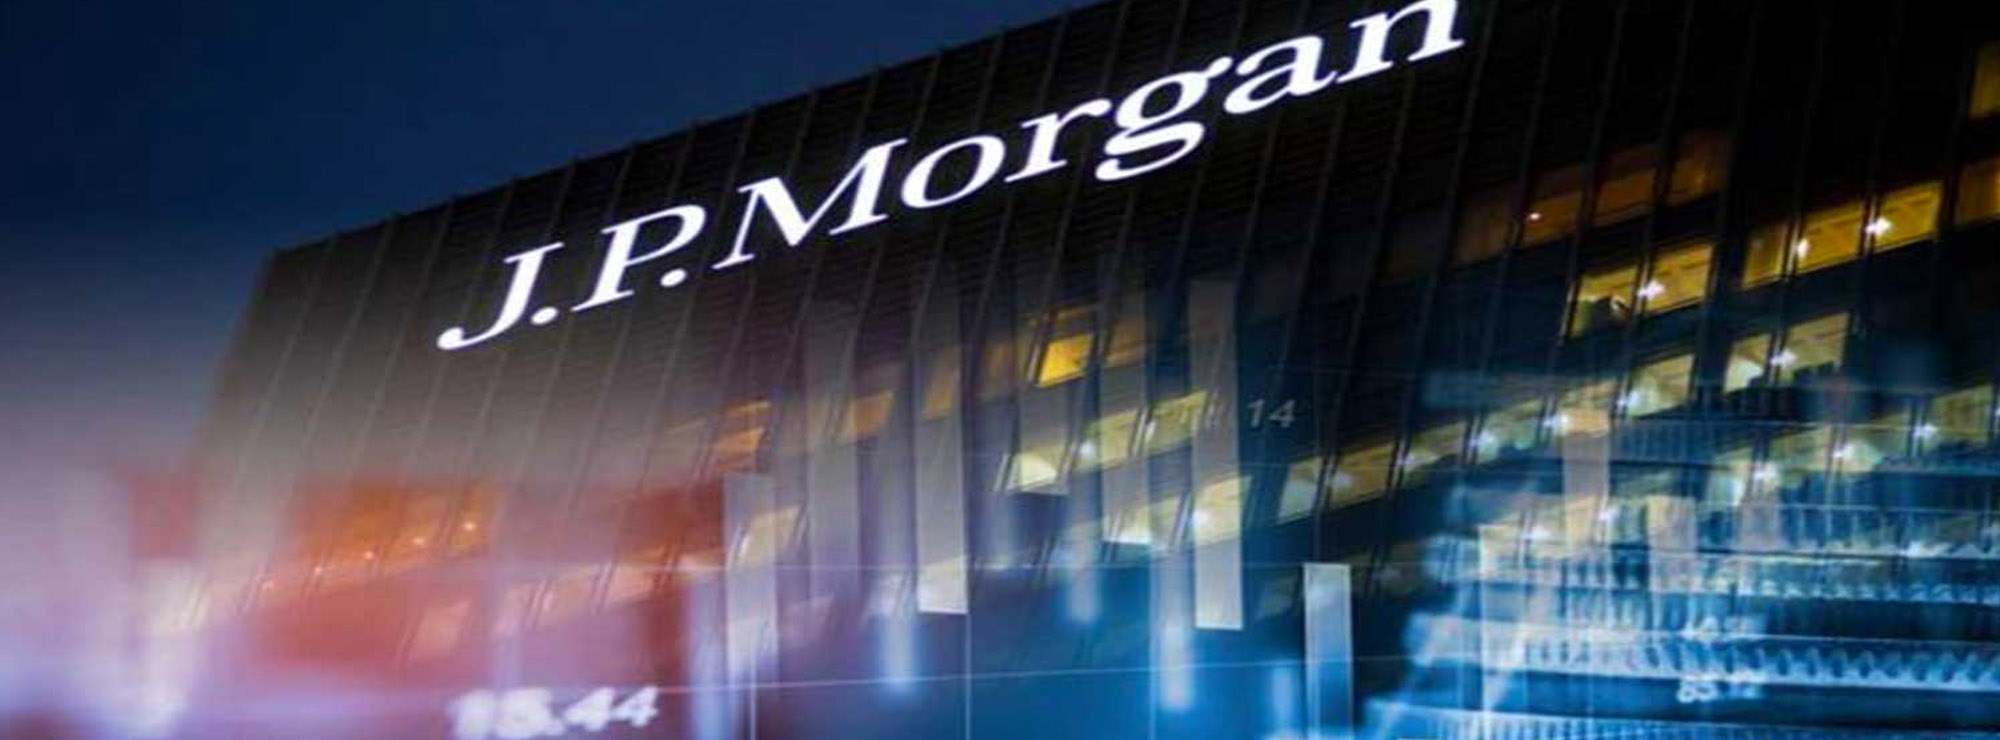 JP Morgan becomes the first major US bank to roll its own crypto coins